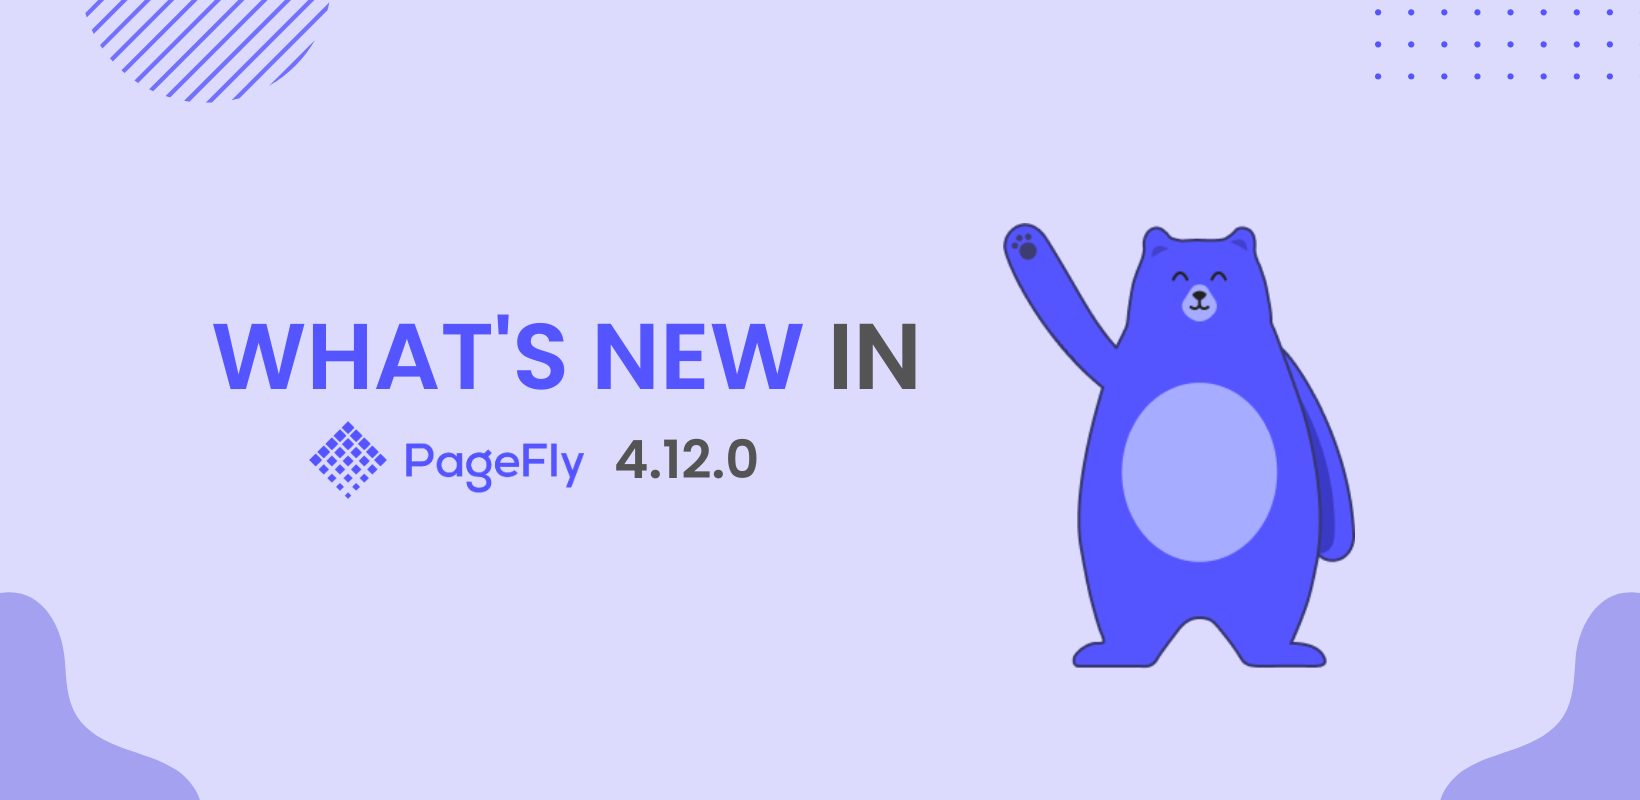 PageFly 4.12.0: Speedier Icons, App Block Boost, 3 New App Integrations Coming with Exclusive Deals!